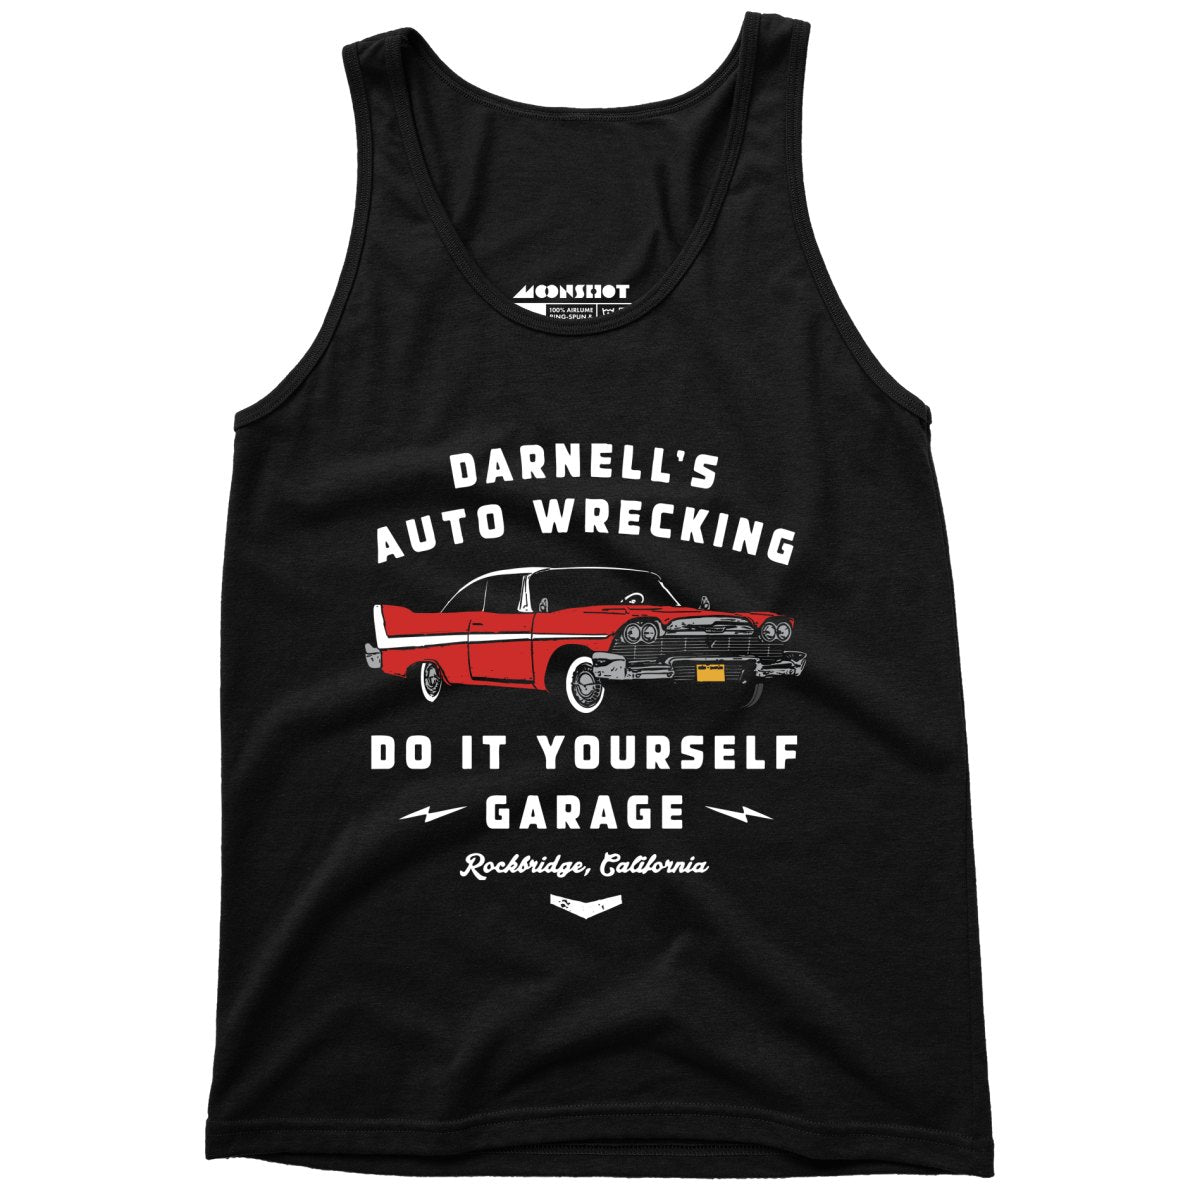 Darnell's Auto Wrecking - Do it Yourself Garage - Unisex Tank Top